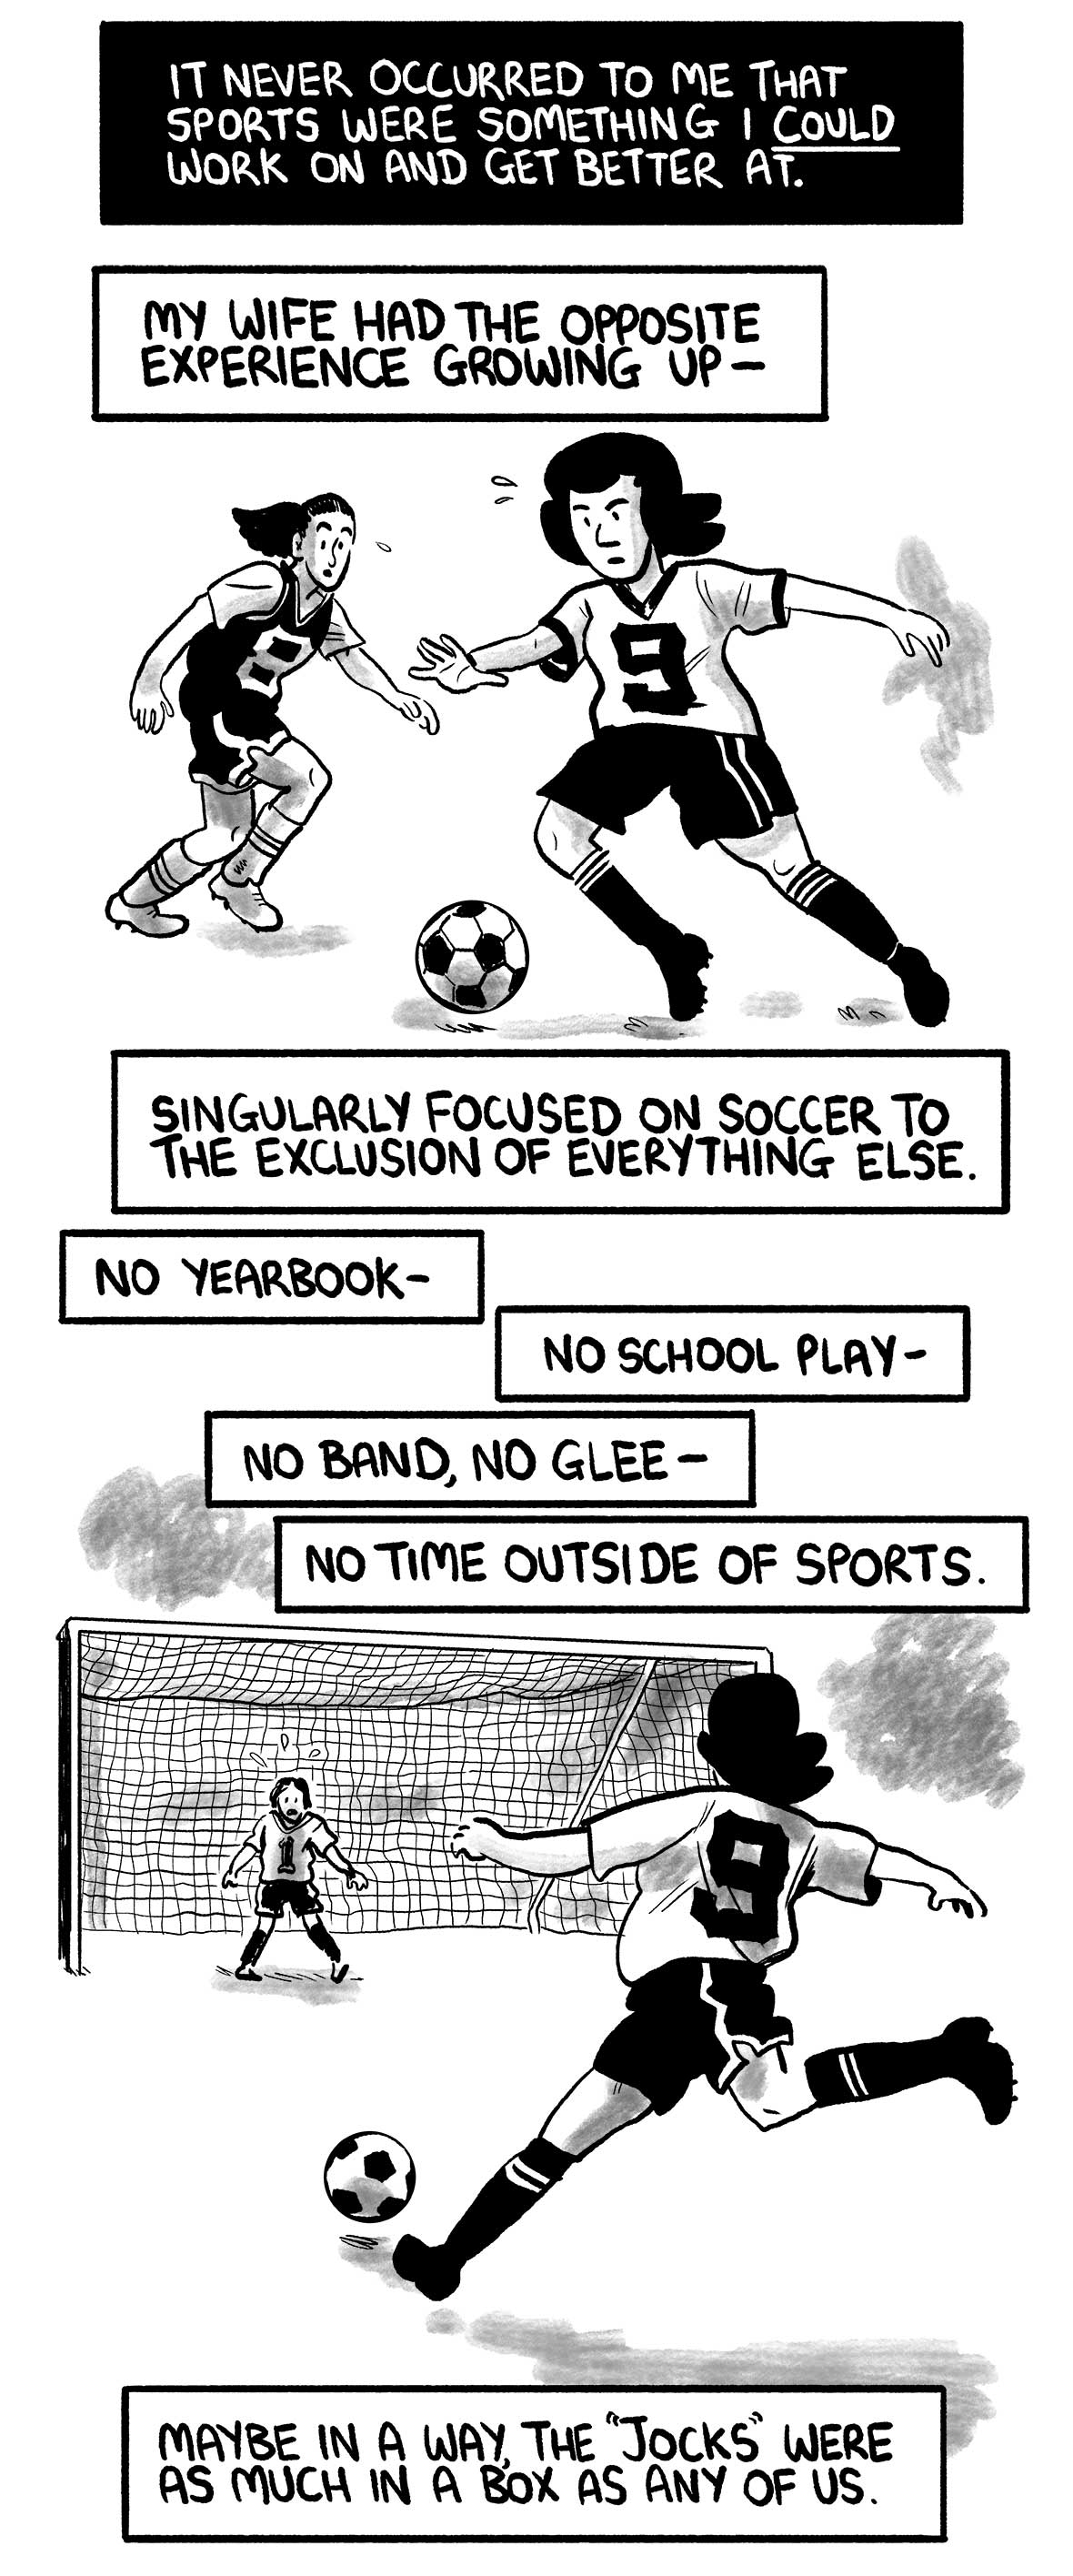 The narrator’s wife dribbles a soccer ball.  The narrator says: “It never occurred to me that sports were something I could work on and get better at.” “My wife had the opposite experience growing up—” “Singularly focused on soccer to the exclusion of everything else.” “No yearbook—” “No school play—” “No band, no glee—” “No time outside of sports.”  The narrator’s wife shoots on goal  The narrator says: “Maybe in a way, the 'jocks' were as much in a box as any of us.”